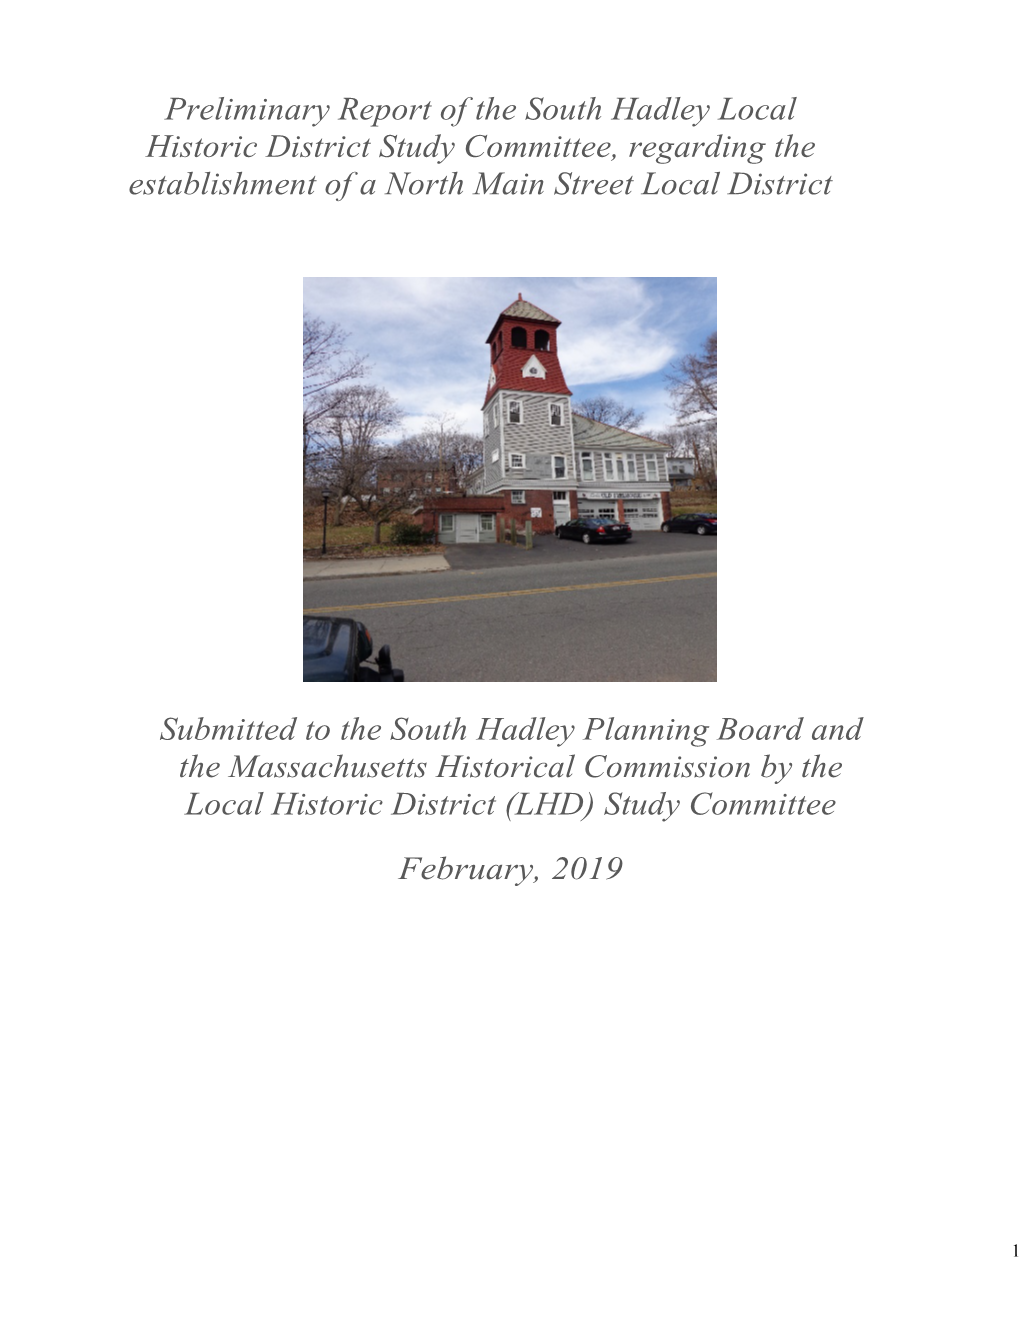 Preliminary Report of the South Hadley Local Historic District Study Committee, Regarding the Establishment of a North Main Street Local District